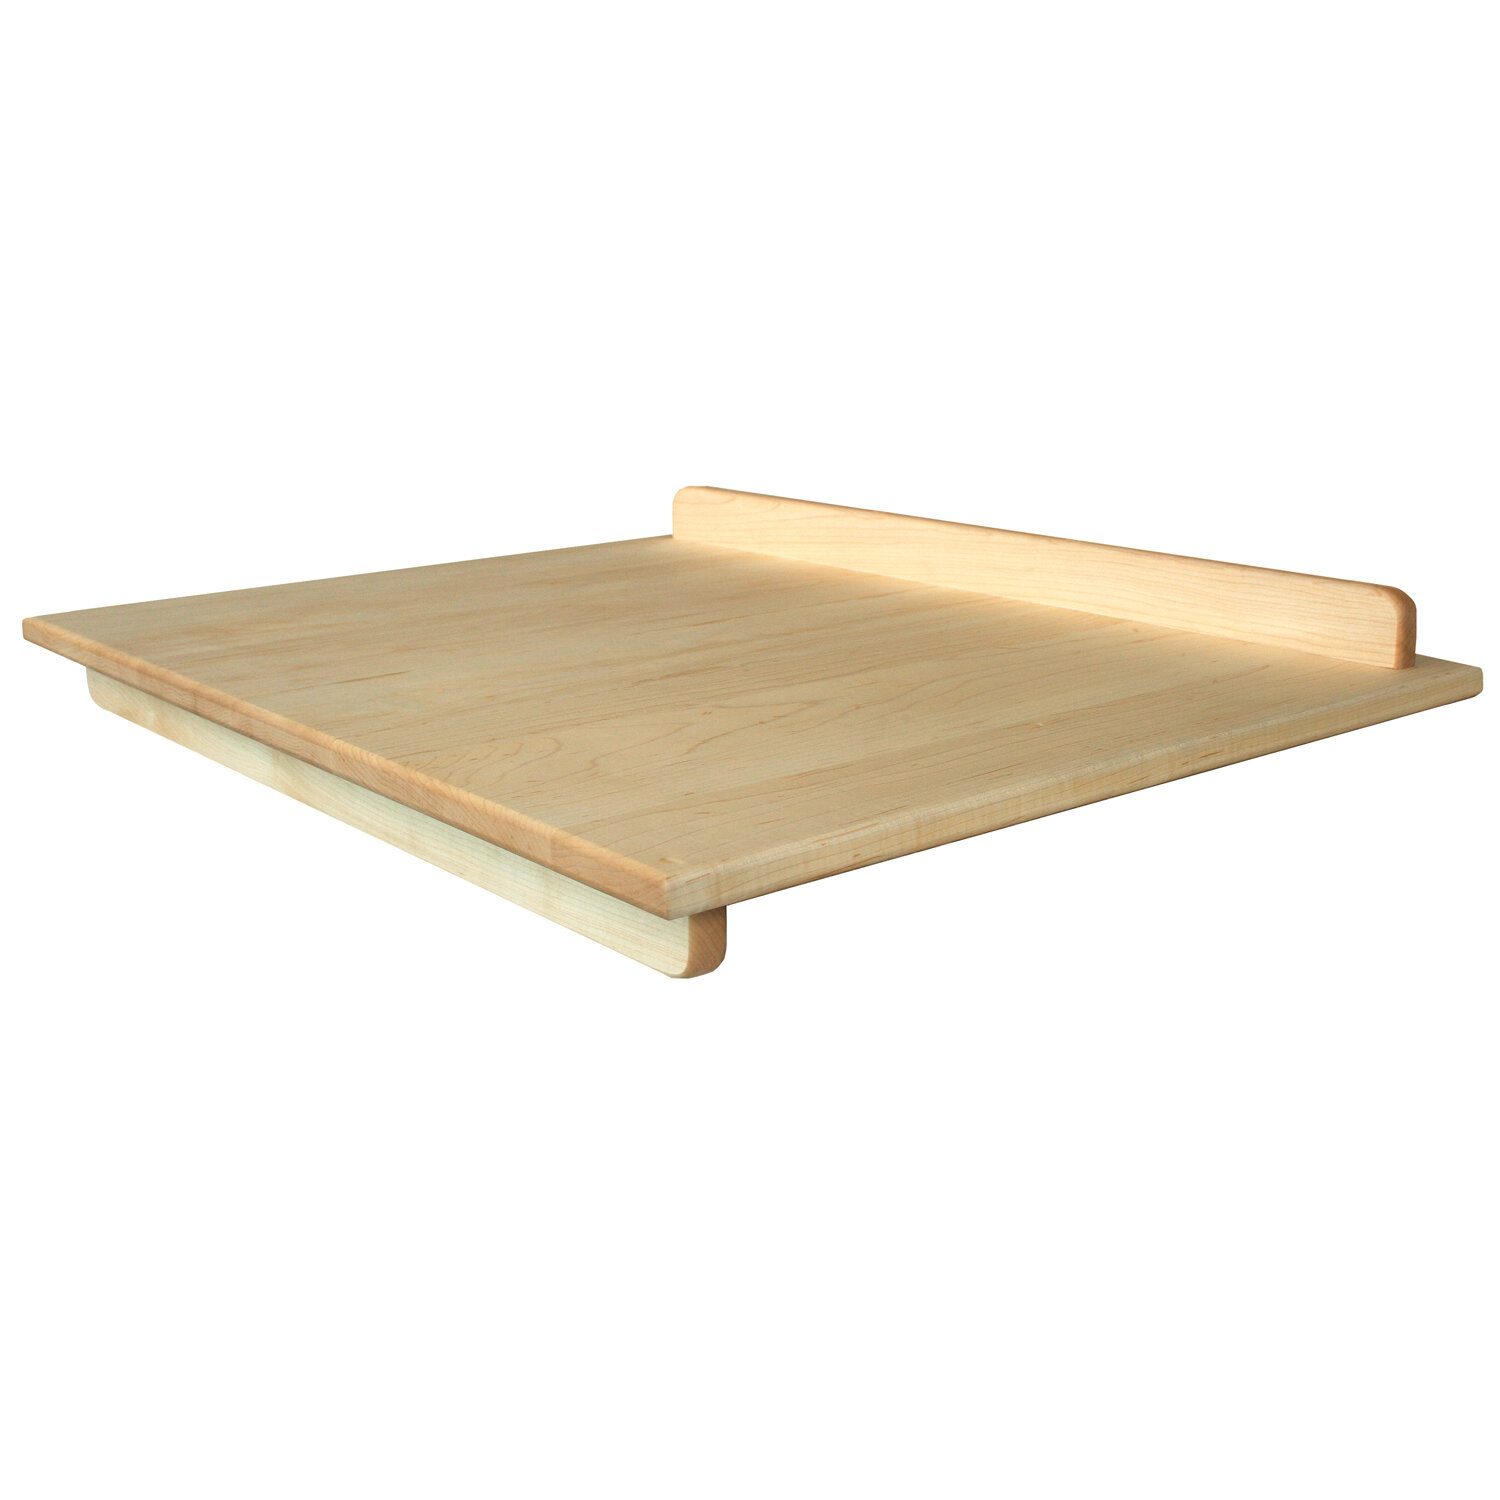 Tableboards Maple Hardwood Reversible Cutting and Bread Board, Beige